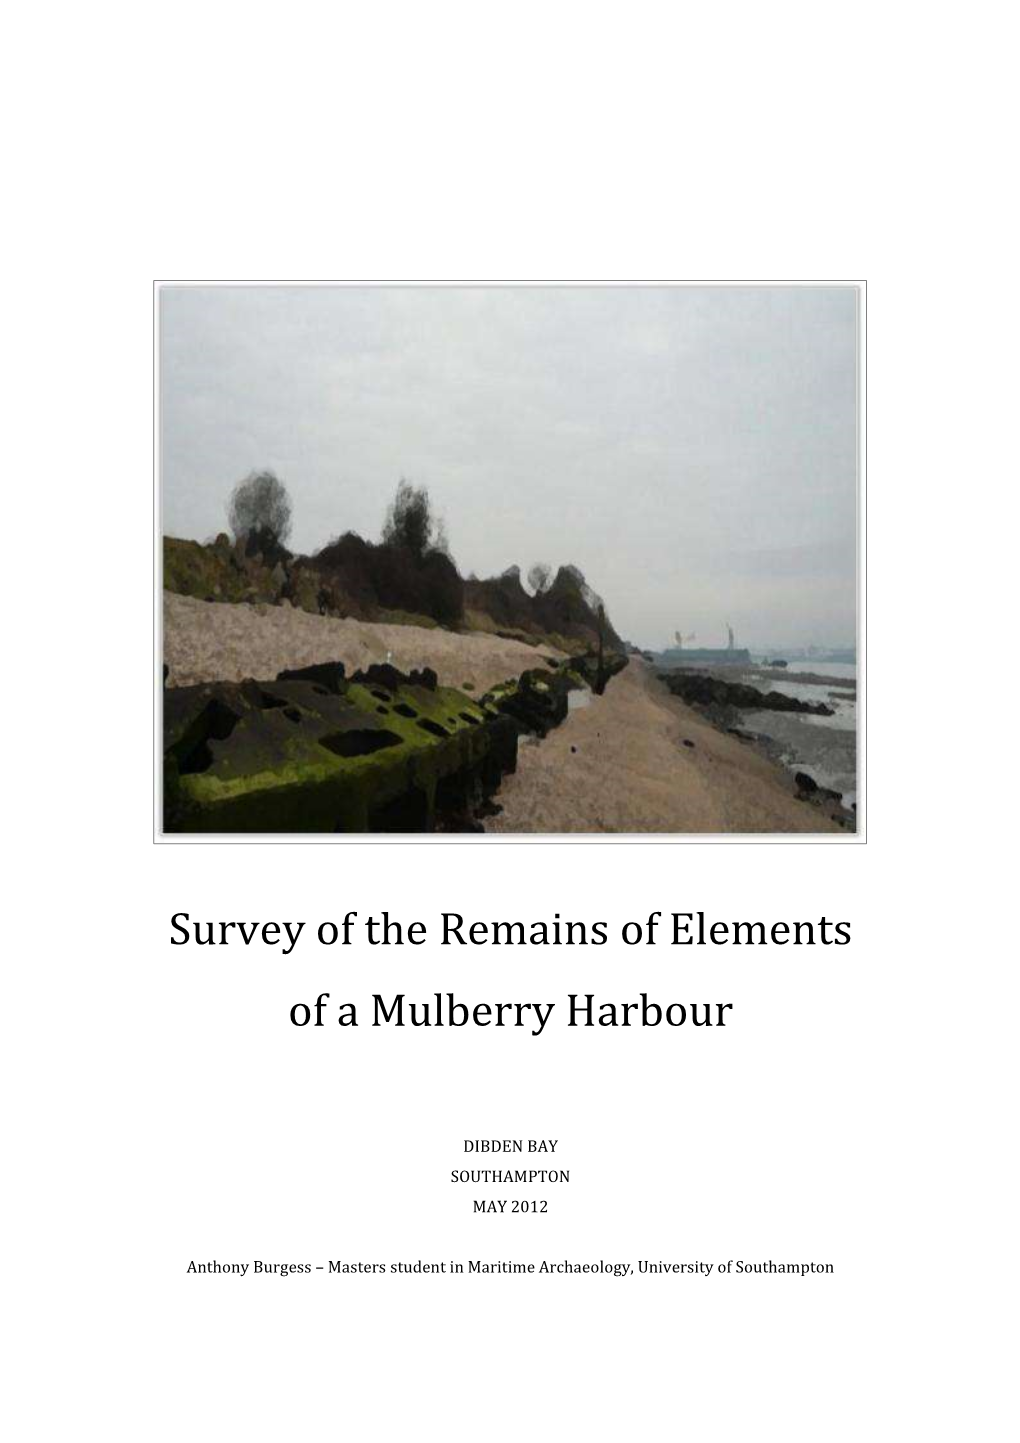 Survey of the Remains of Elements of a Mulberry Harbour